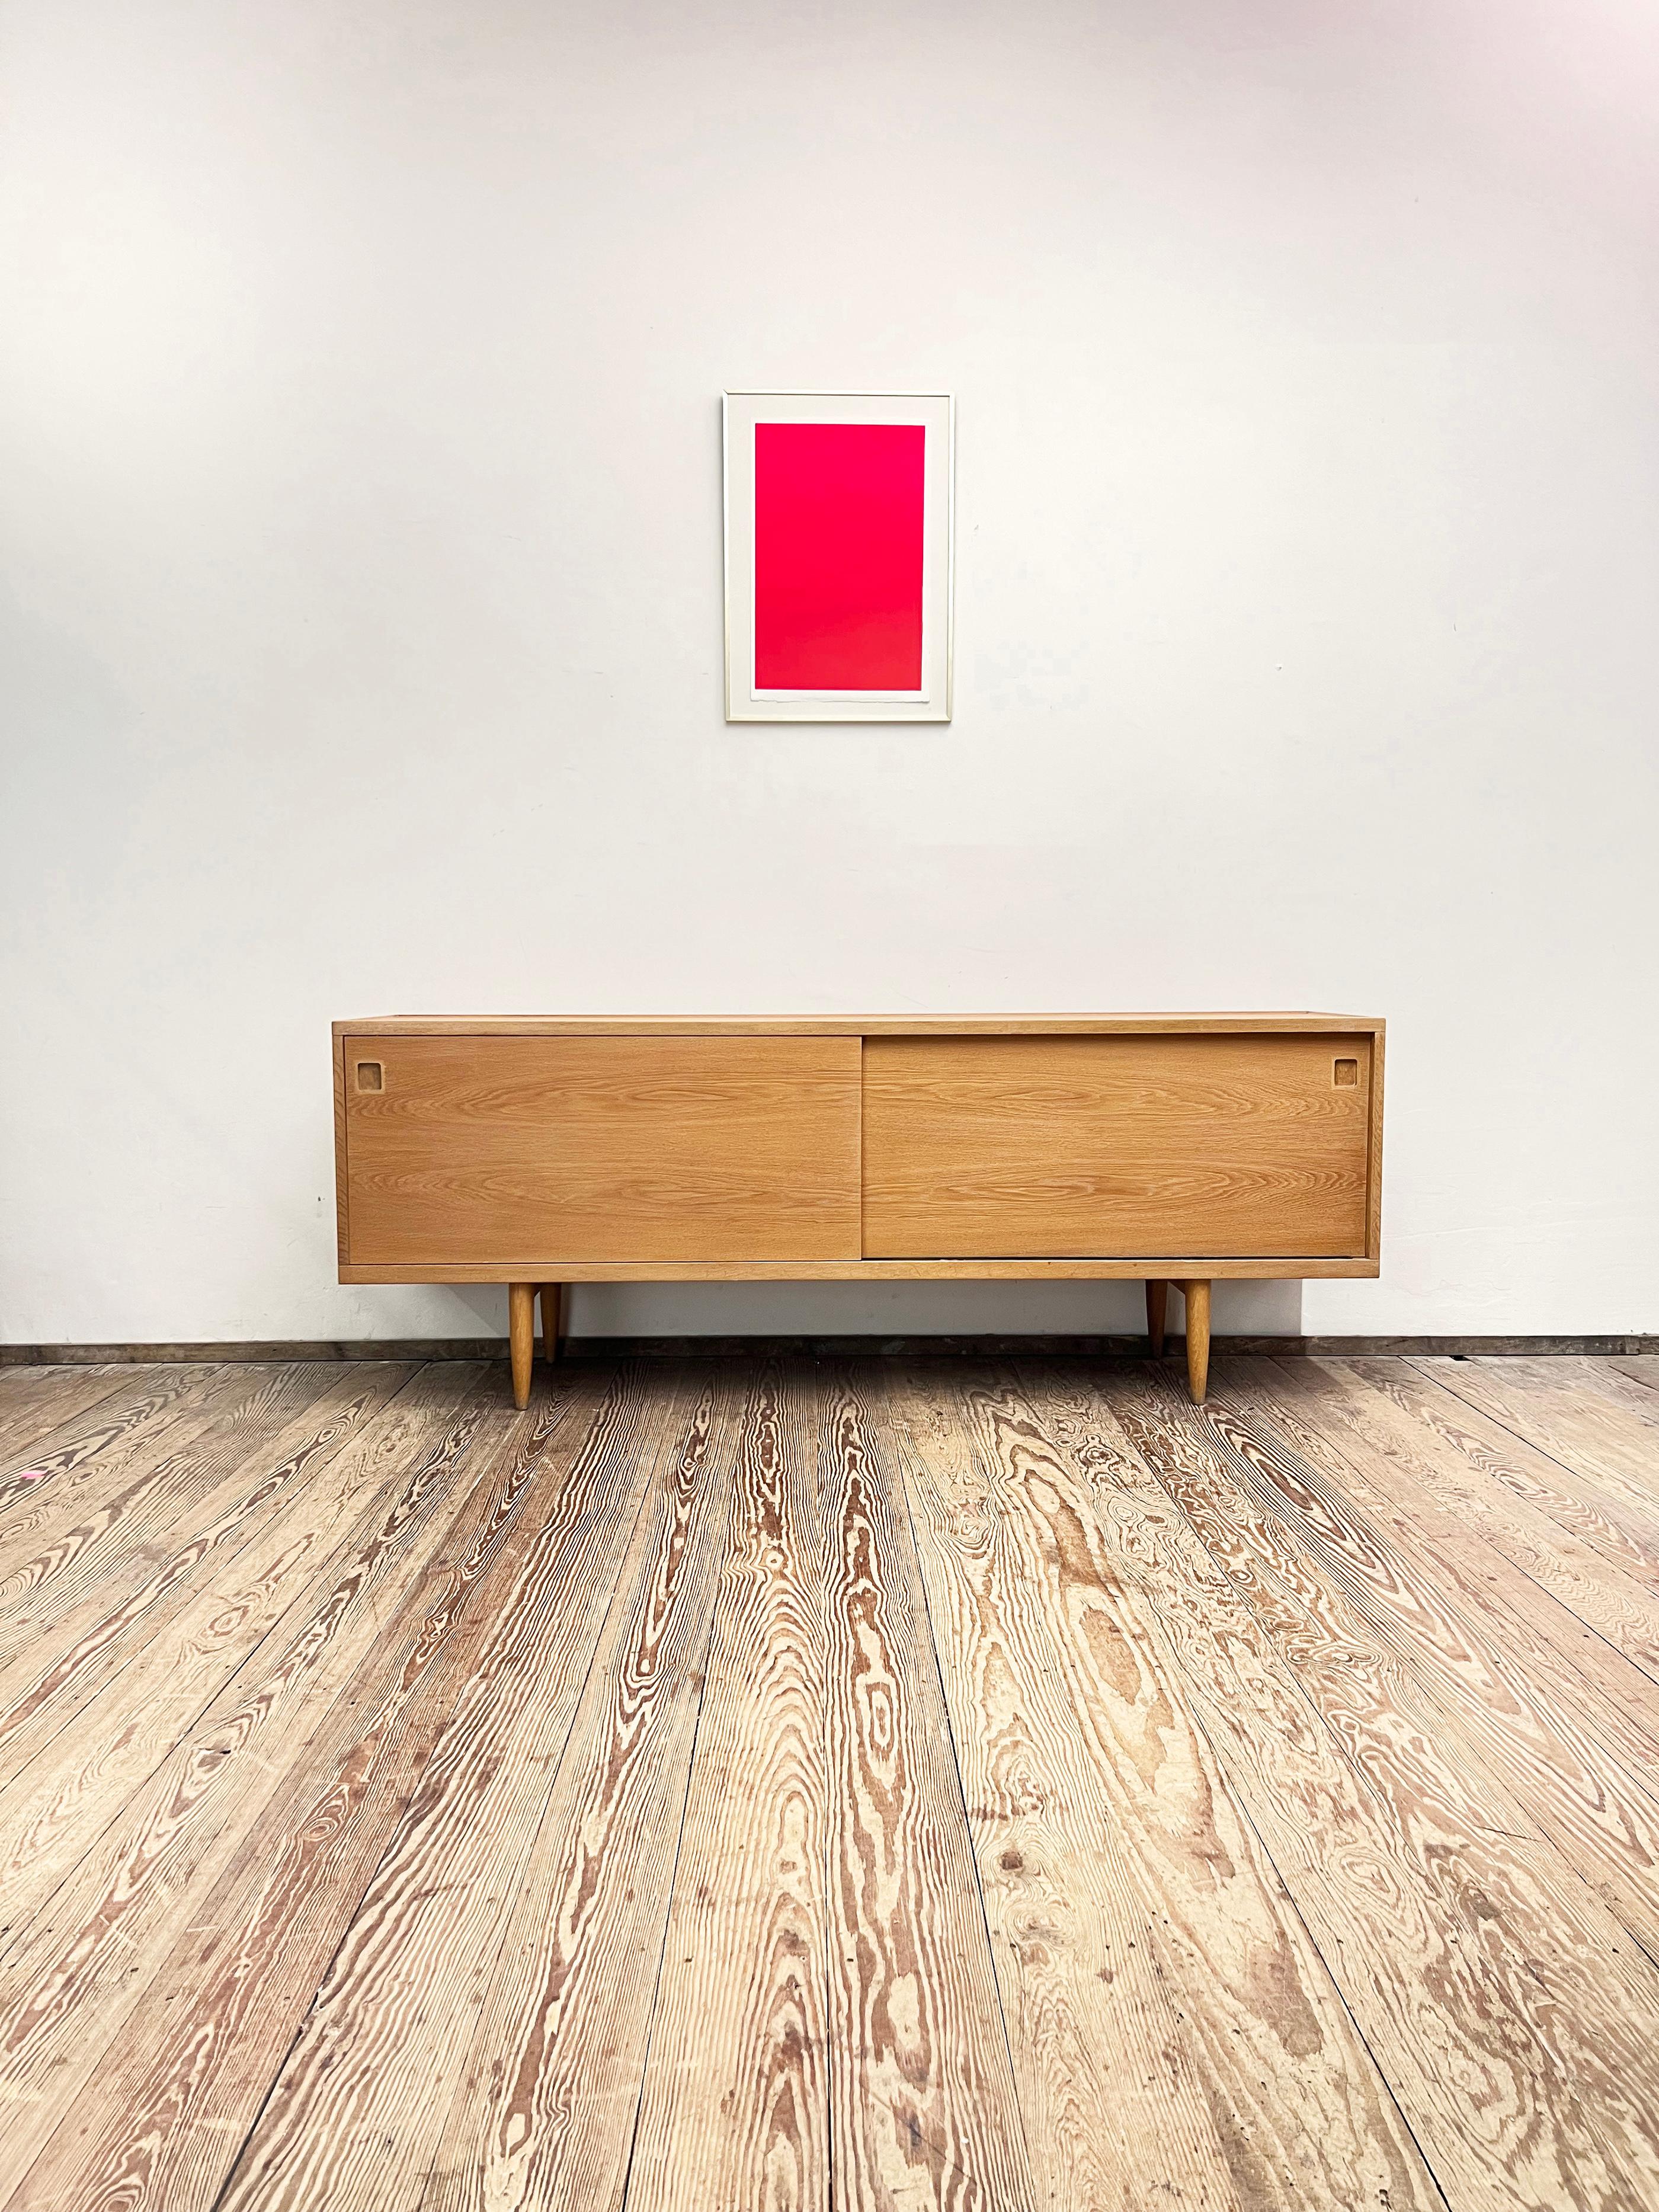 Dimensions: 210x48x80 cm (Width x Depth x Height)

This Scandinavian design sideboard or TV console was designed in the 1950s by Niels O. Møller and manufactured by J.L. Møllers in Denmark.

The mid-century Credenza showcases exquisite Danish design